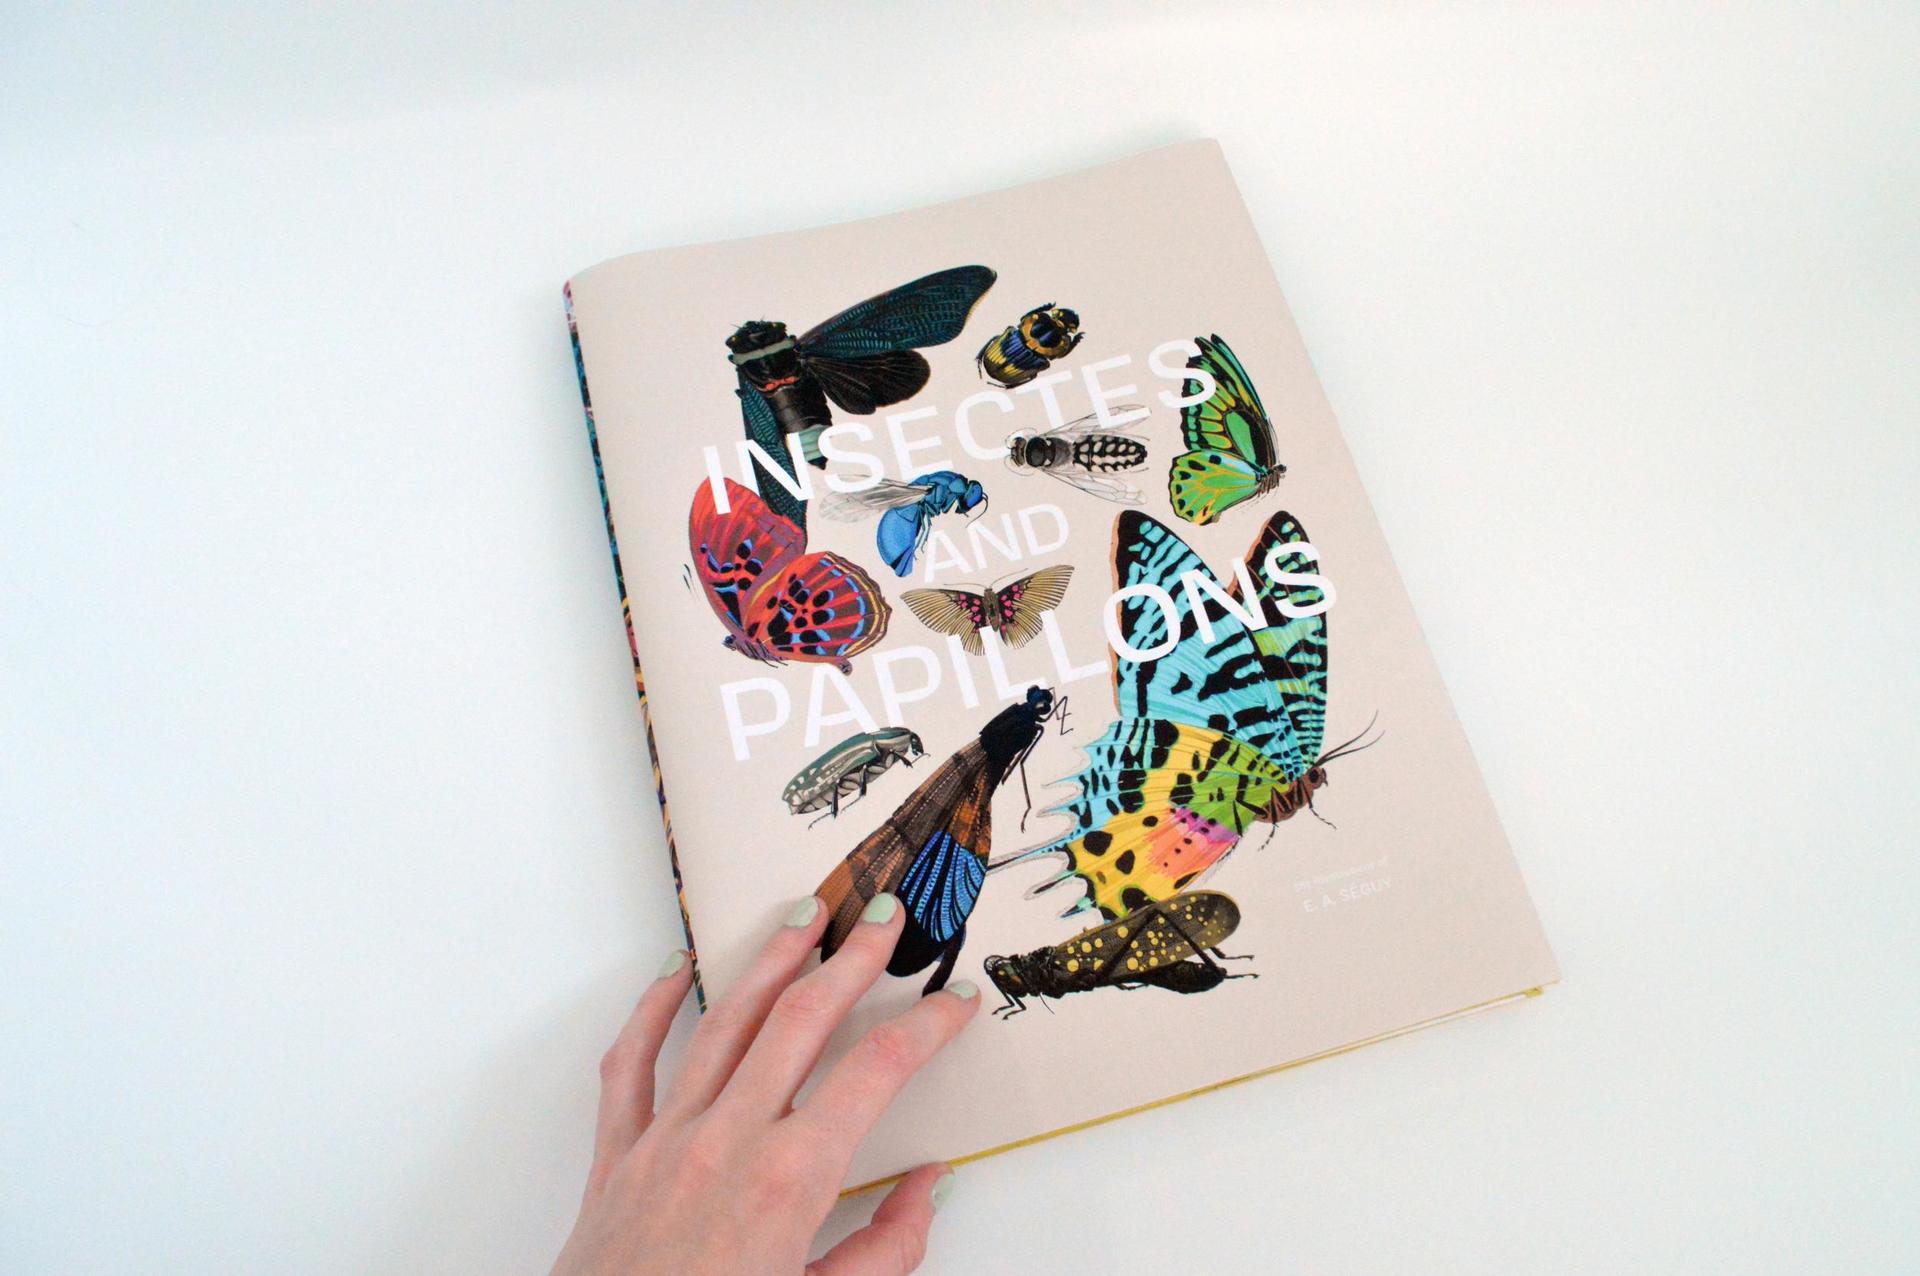 Hand holding the book 'Insectes adn Papillons'